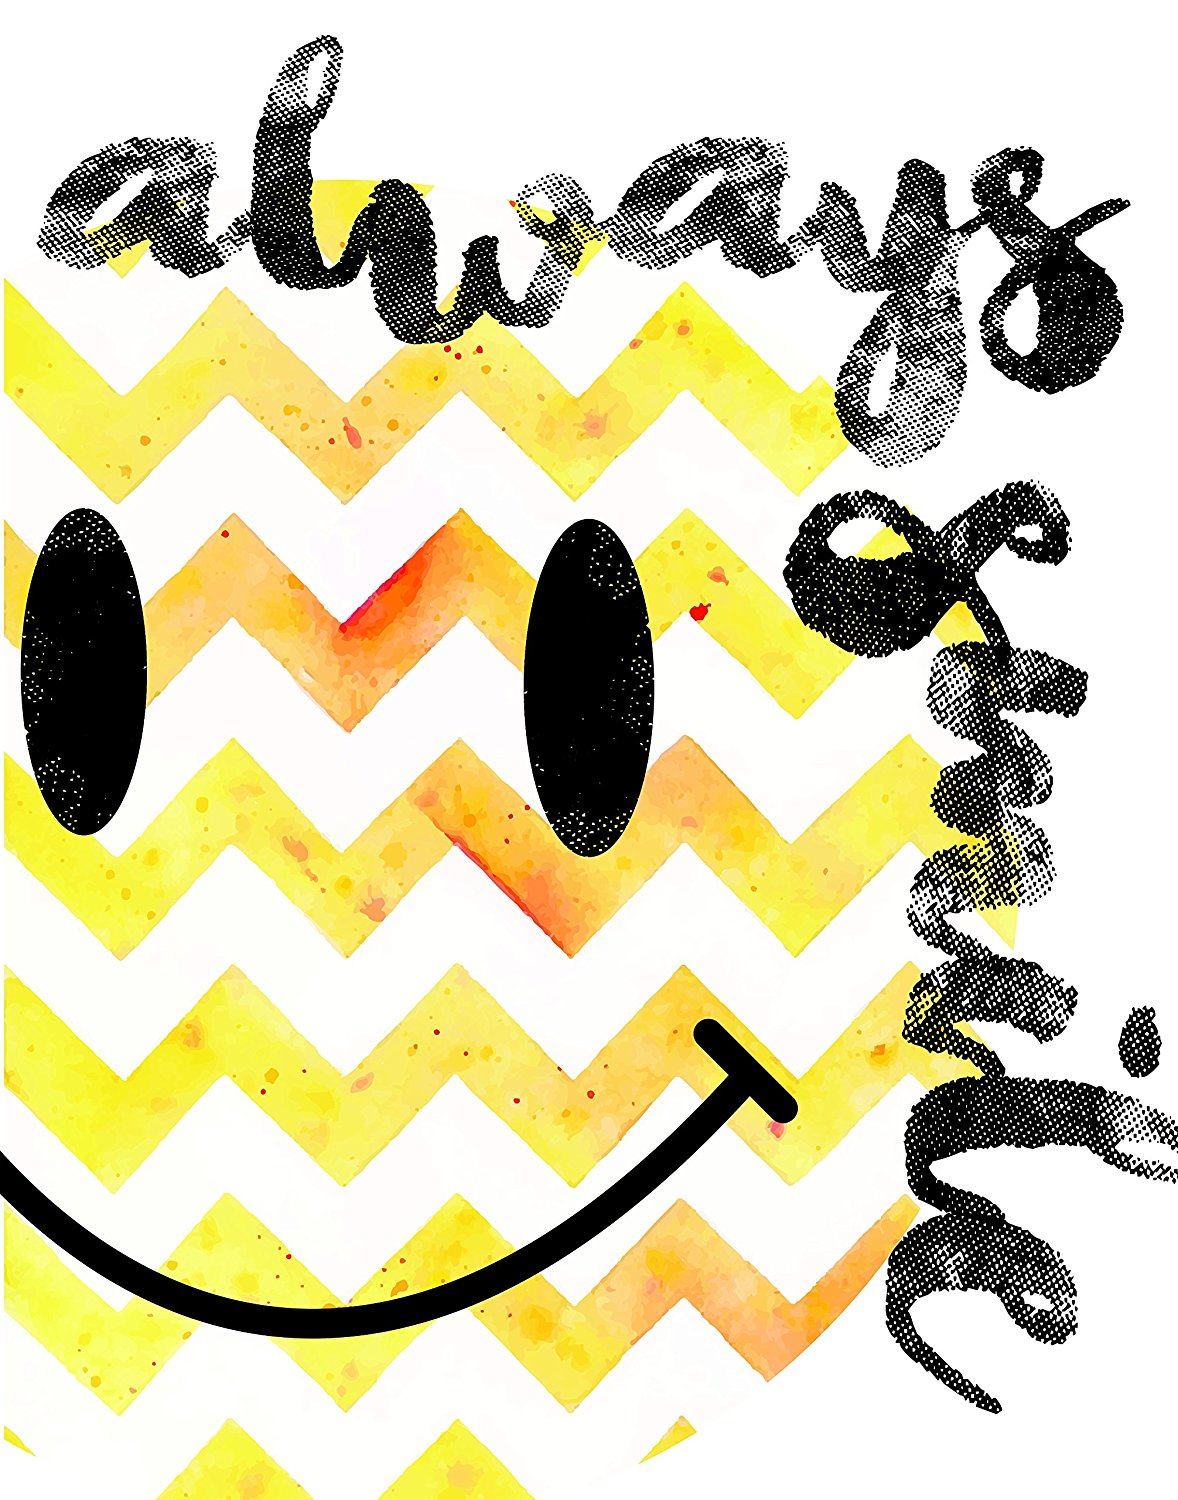 Always Smile Life Daily Quotes Sayings Pictures